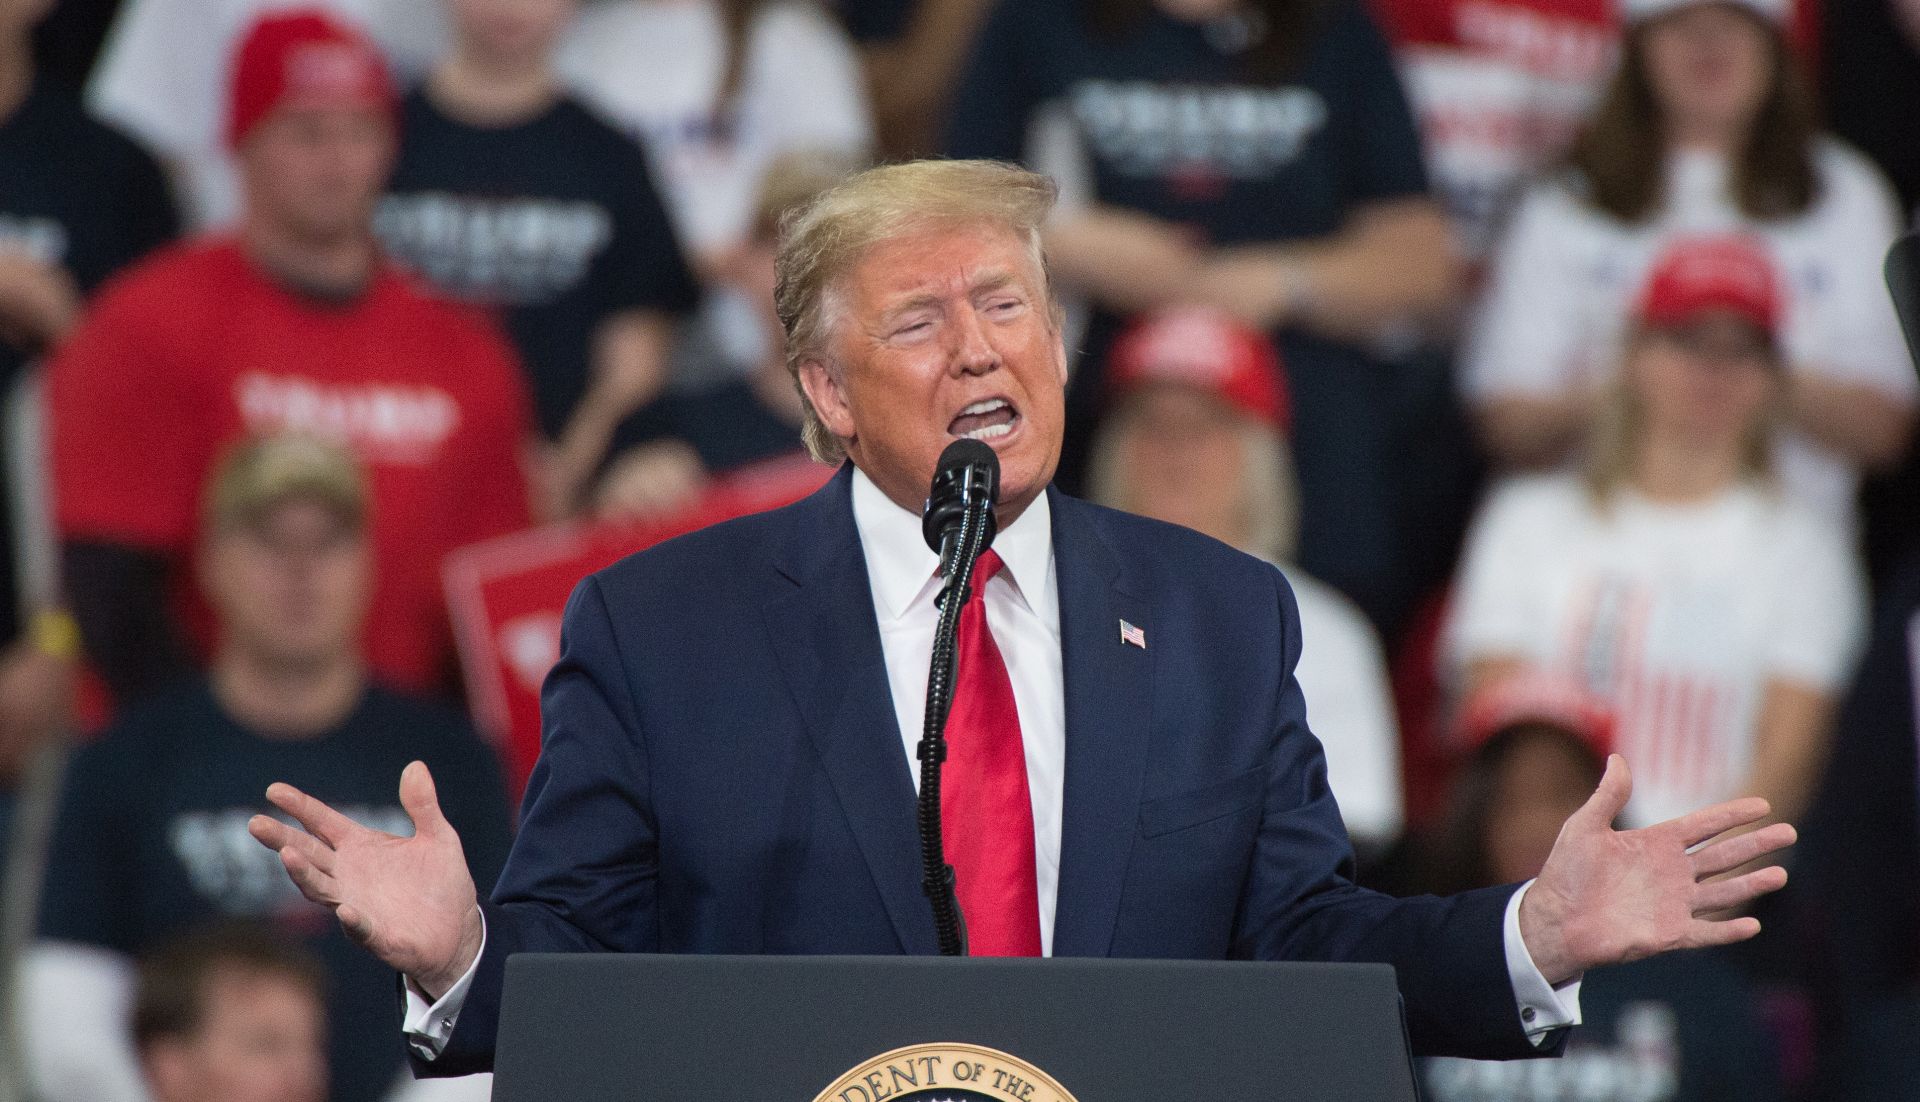 epa08061559 US President Donald J. Trump speaks during a campaign rally at the Giant Center in Hershey, Pennsylvania, USA, 10 December 2019. President Trump carried the battleground state of Pennsylvania by just over 44,000 votes in 2016.  EPA/TRACIE VAN AUKEN